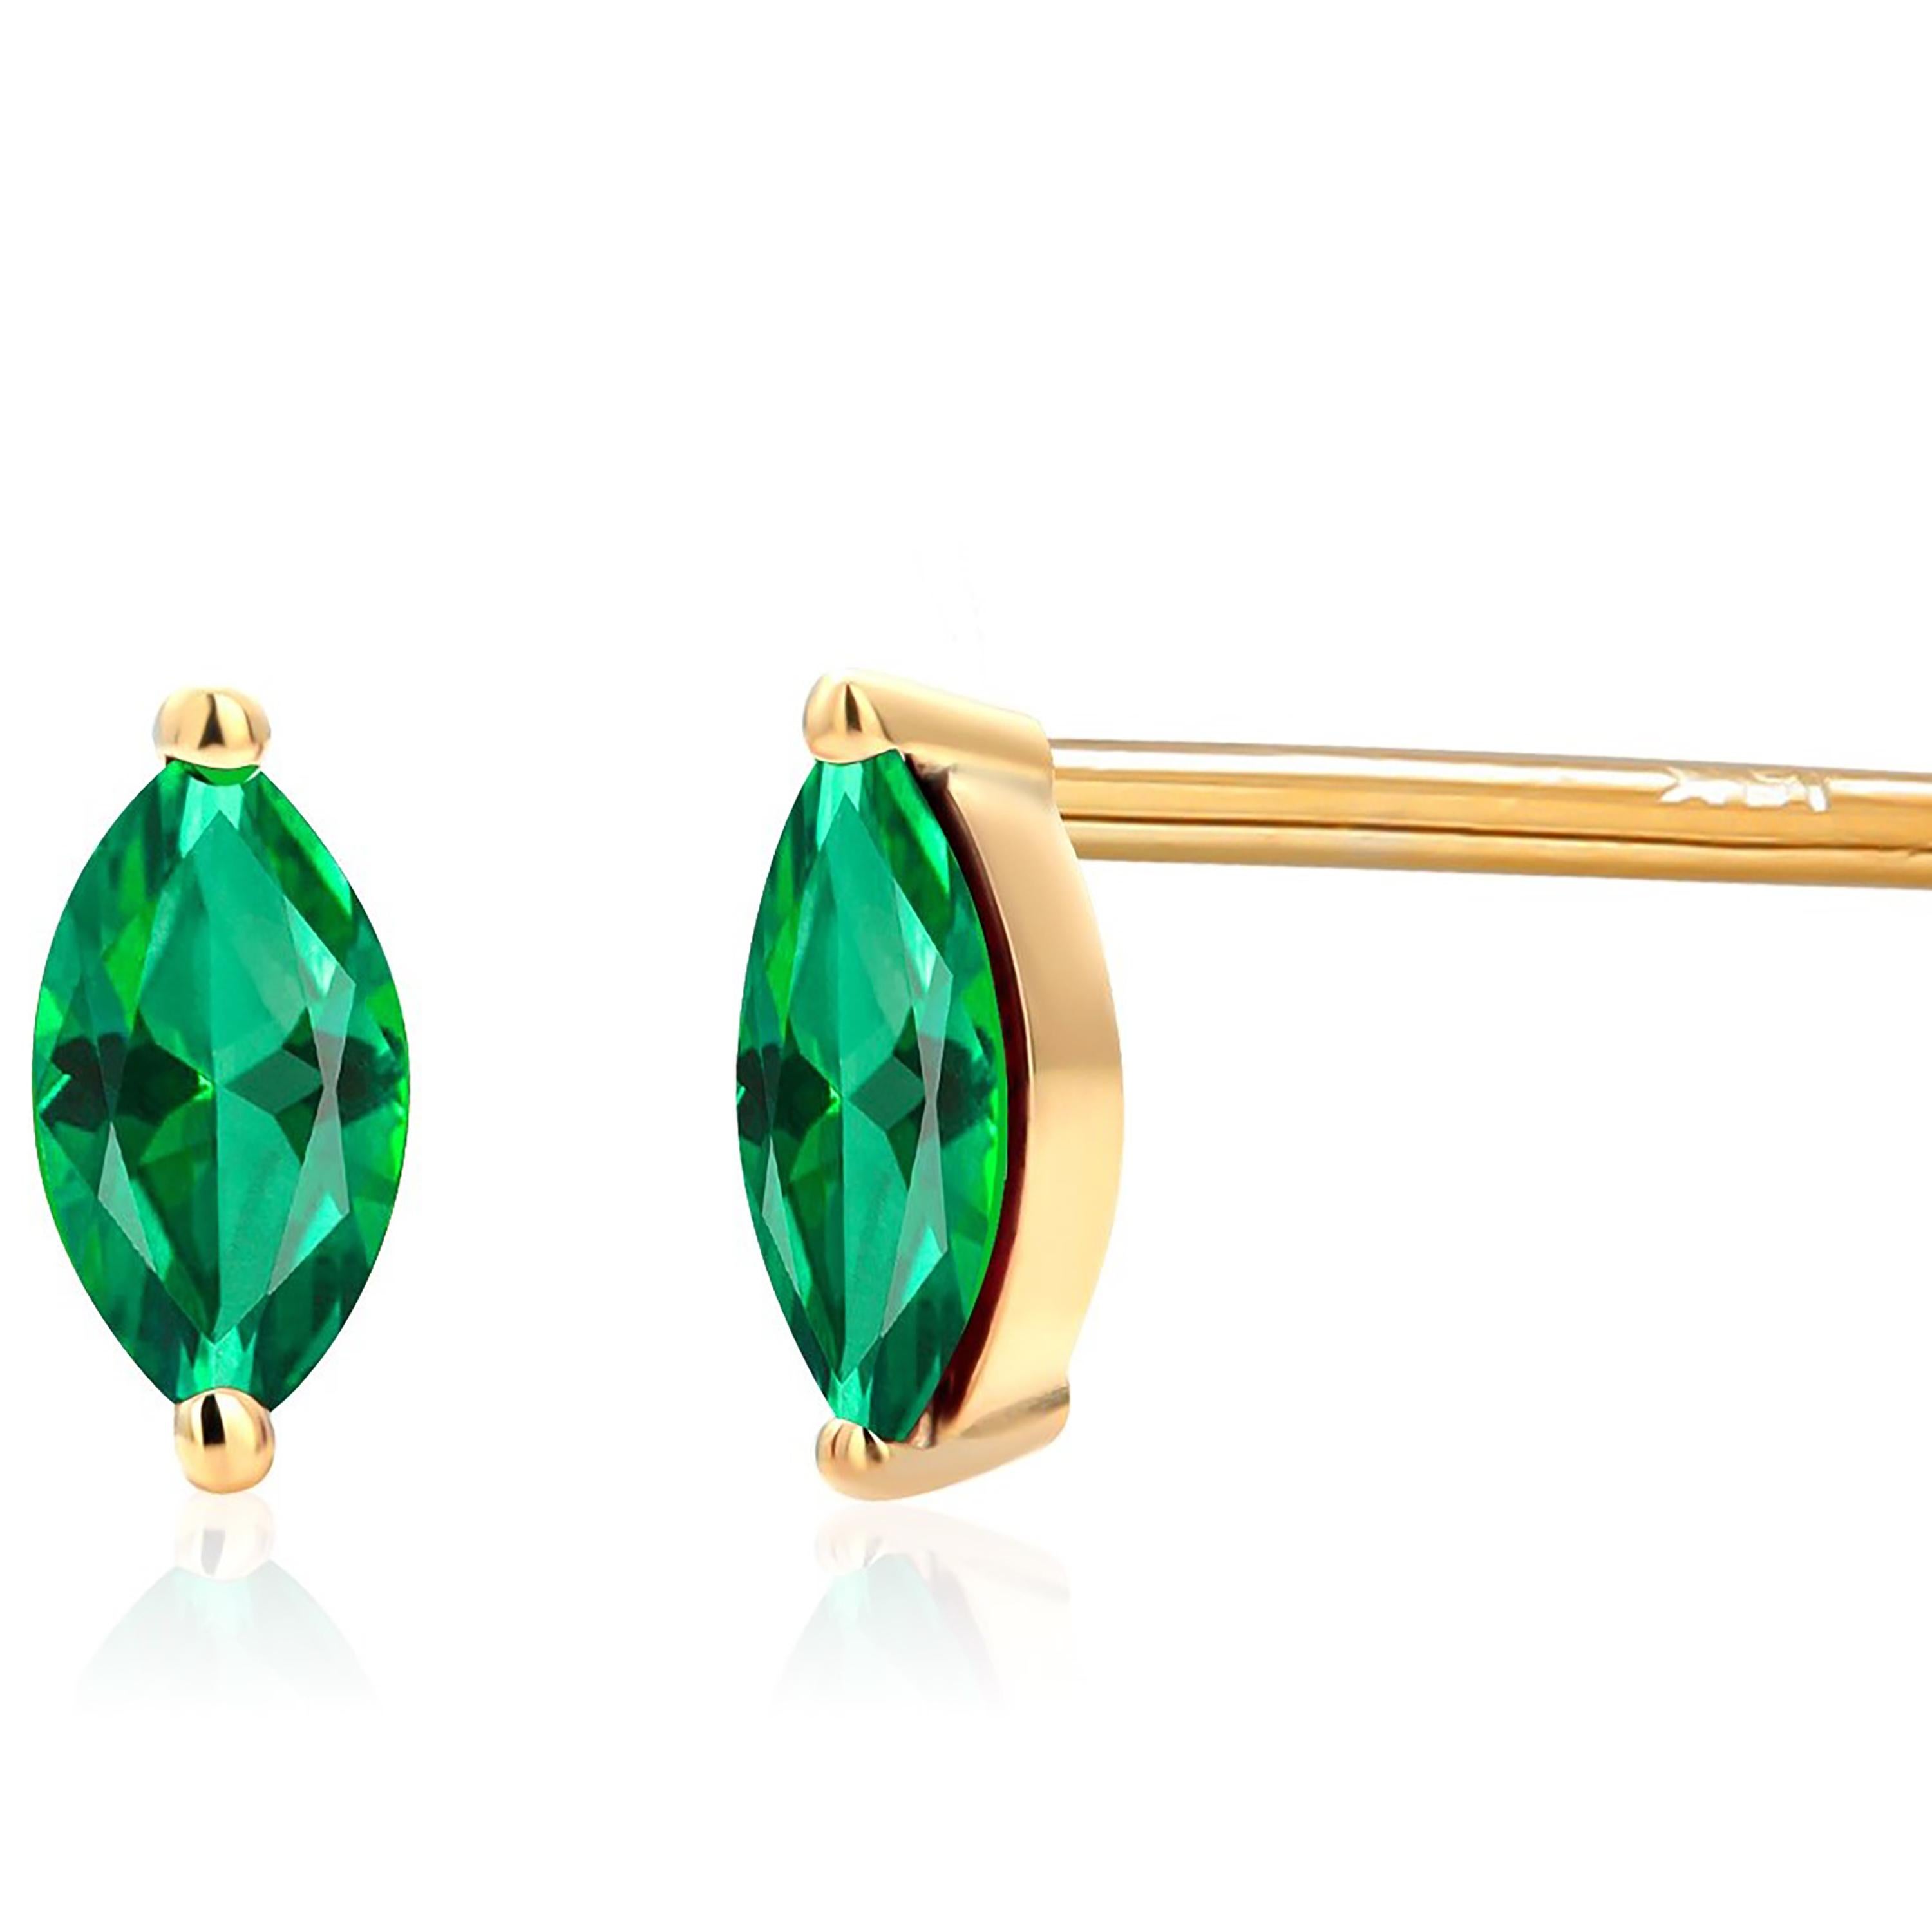 These elegant earrings feature a pair of exquisite Marquise Emeralds, each weighing 0.25 carats, set delicately in 14 karat yellow gold. 
Their petite size, measuring just 0.23 inches in length by 0.15 inch in width makes them perfect for adorning